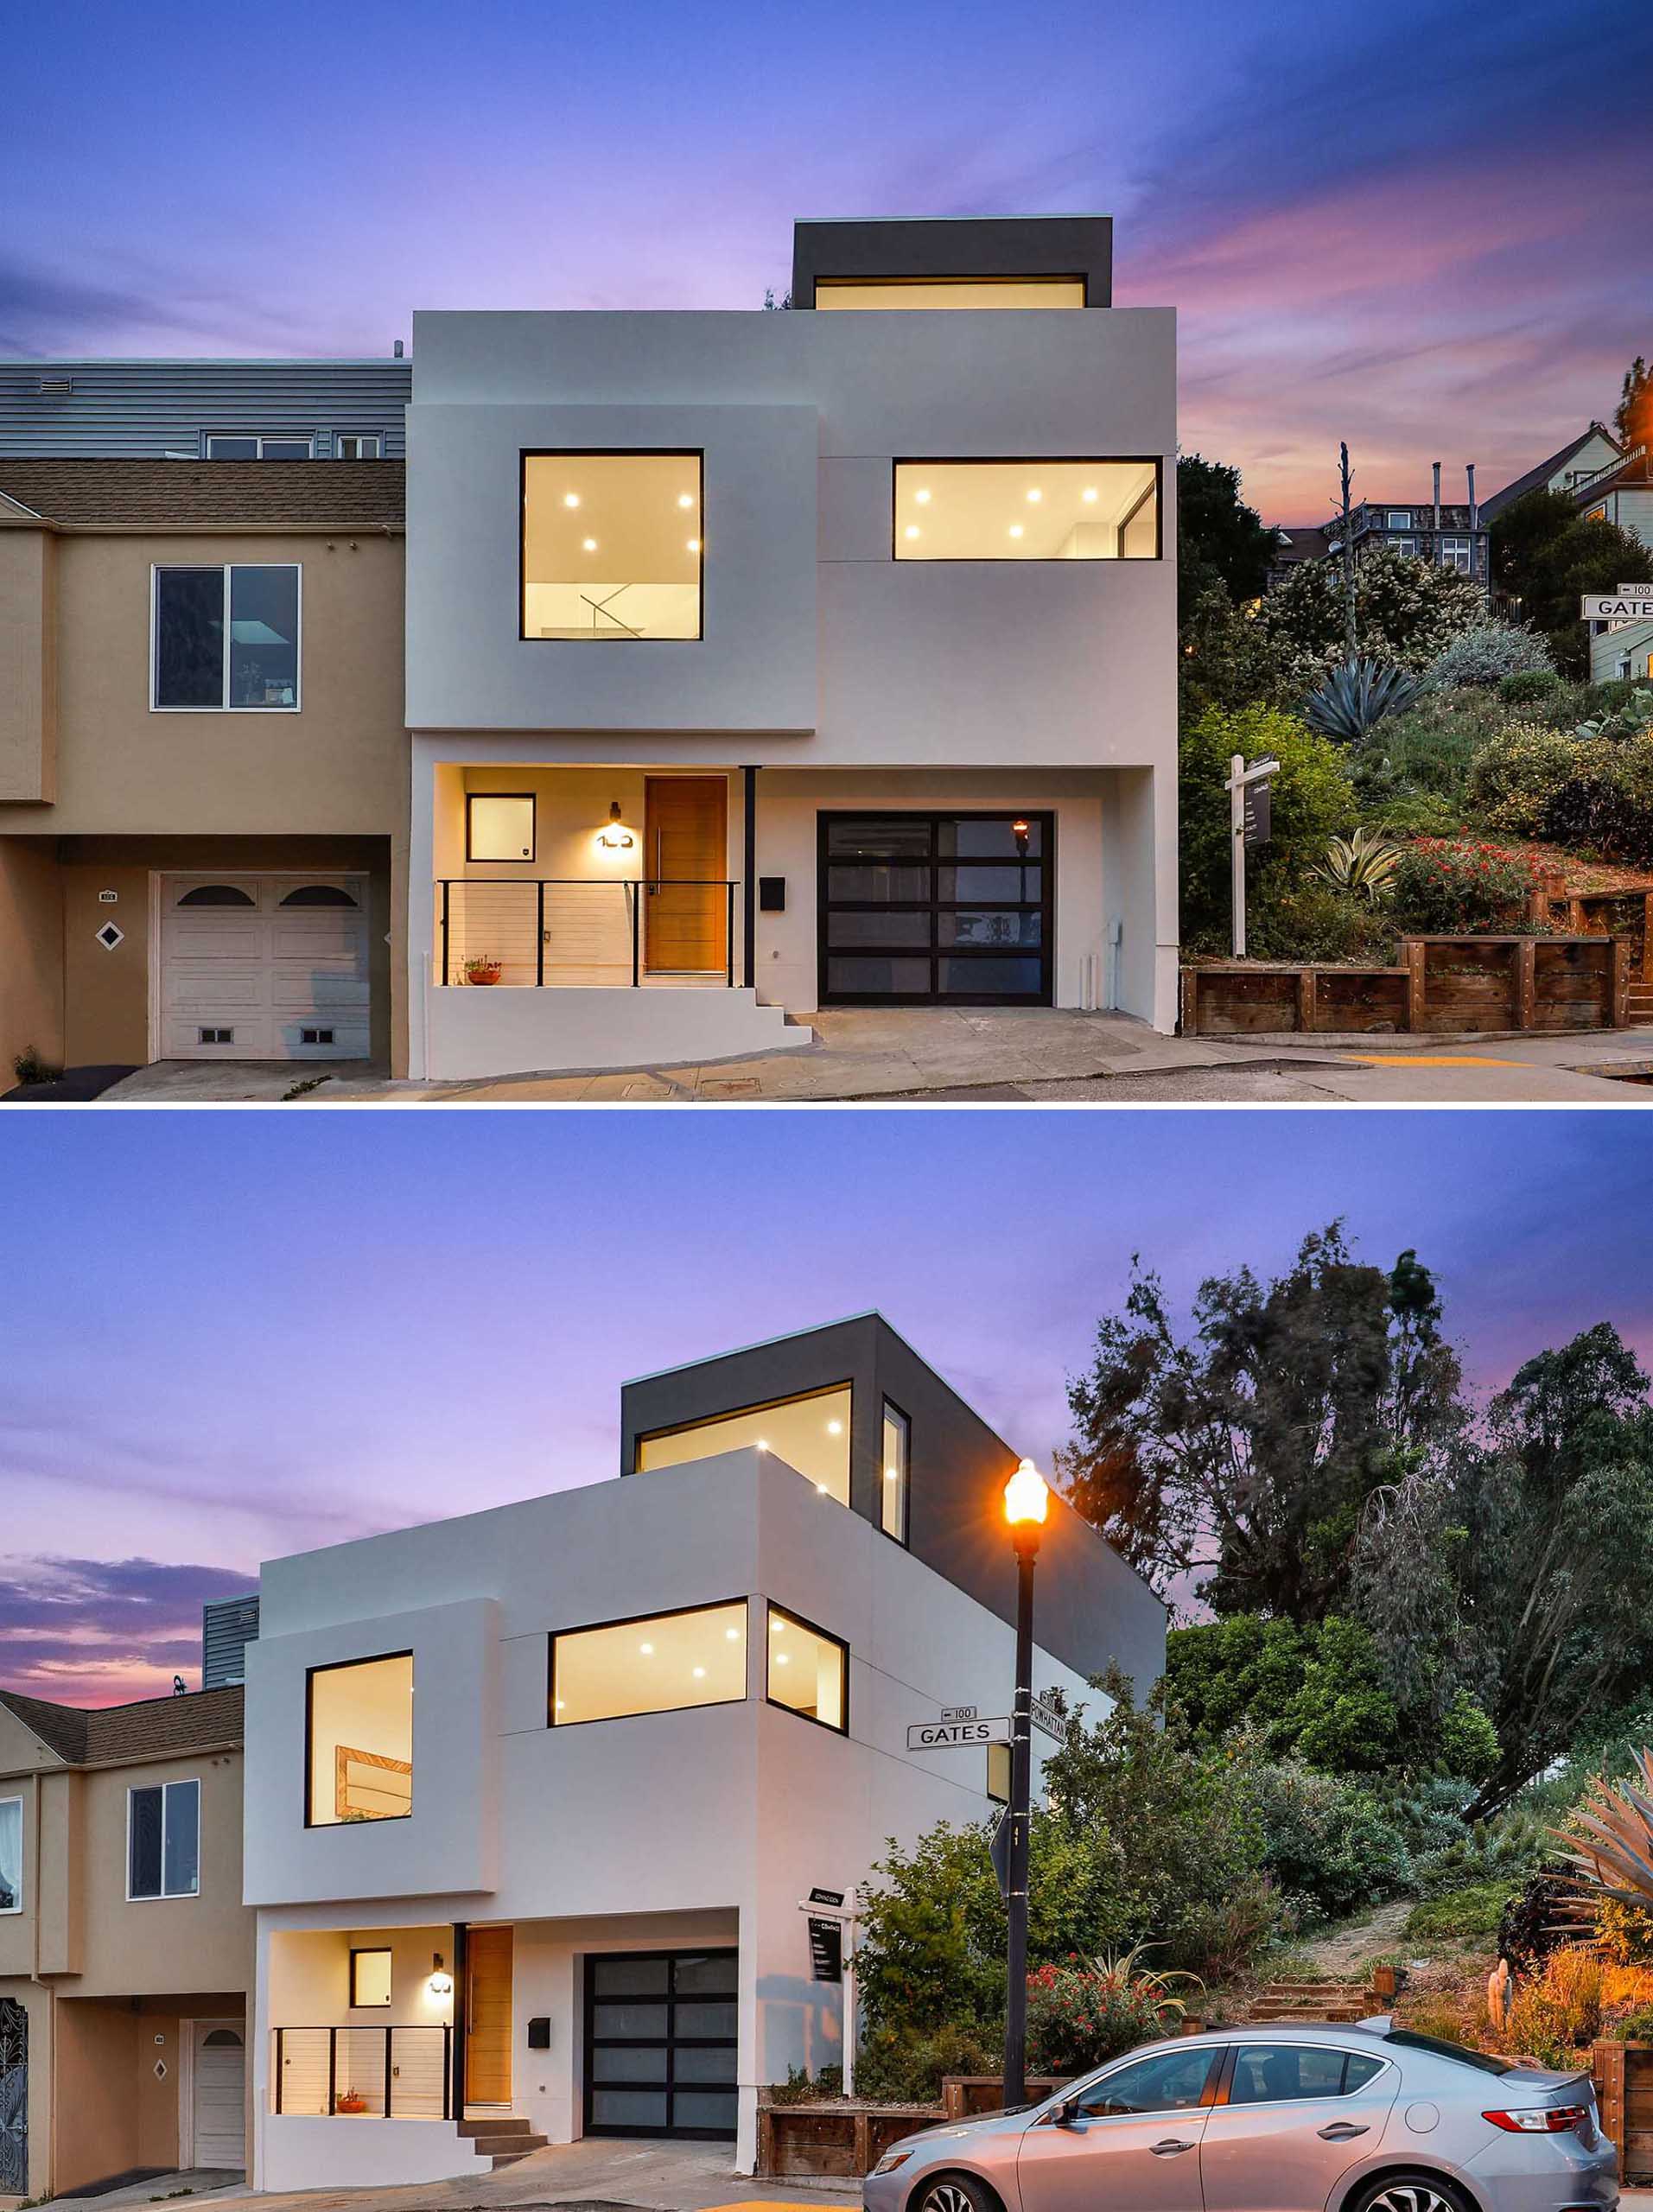 A renovated home includes a new third-floor cantilevered off the back, adding nearly 900 sqft of space.